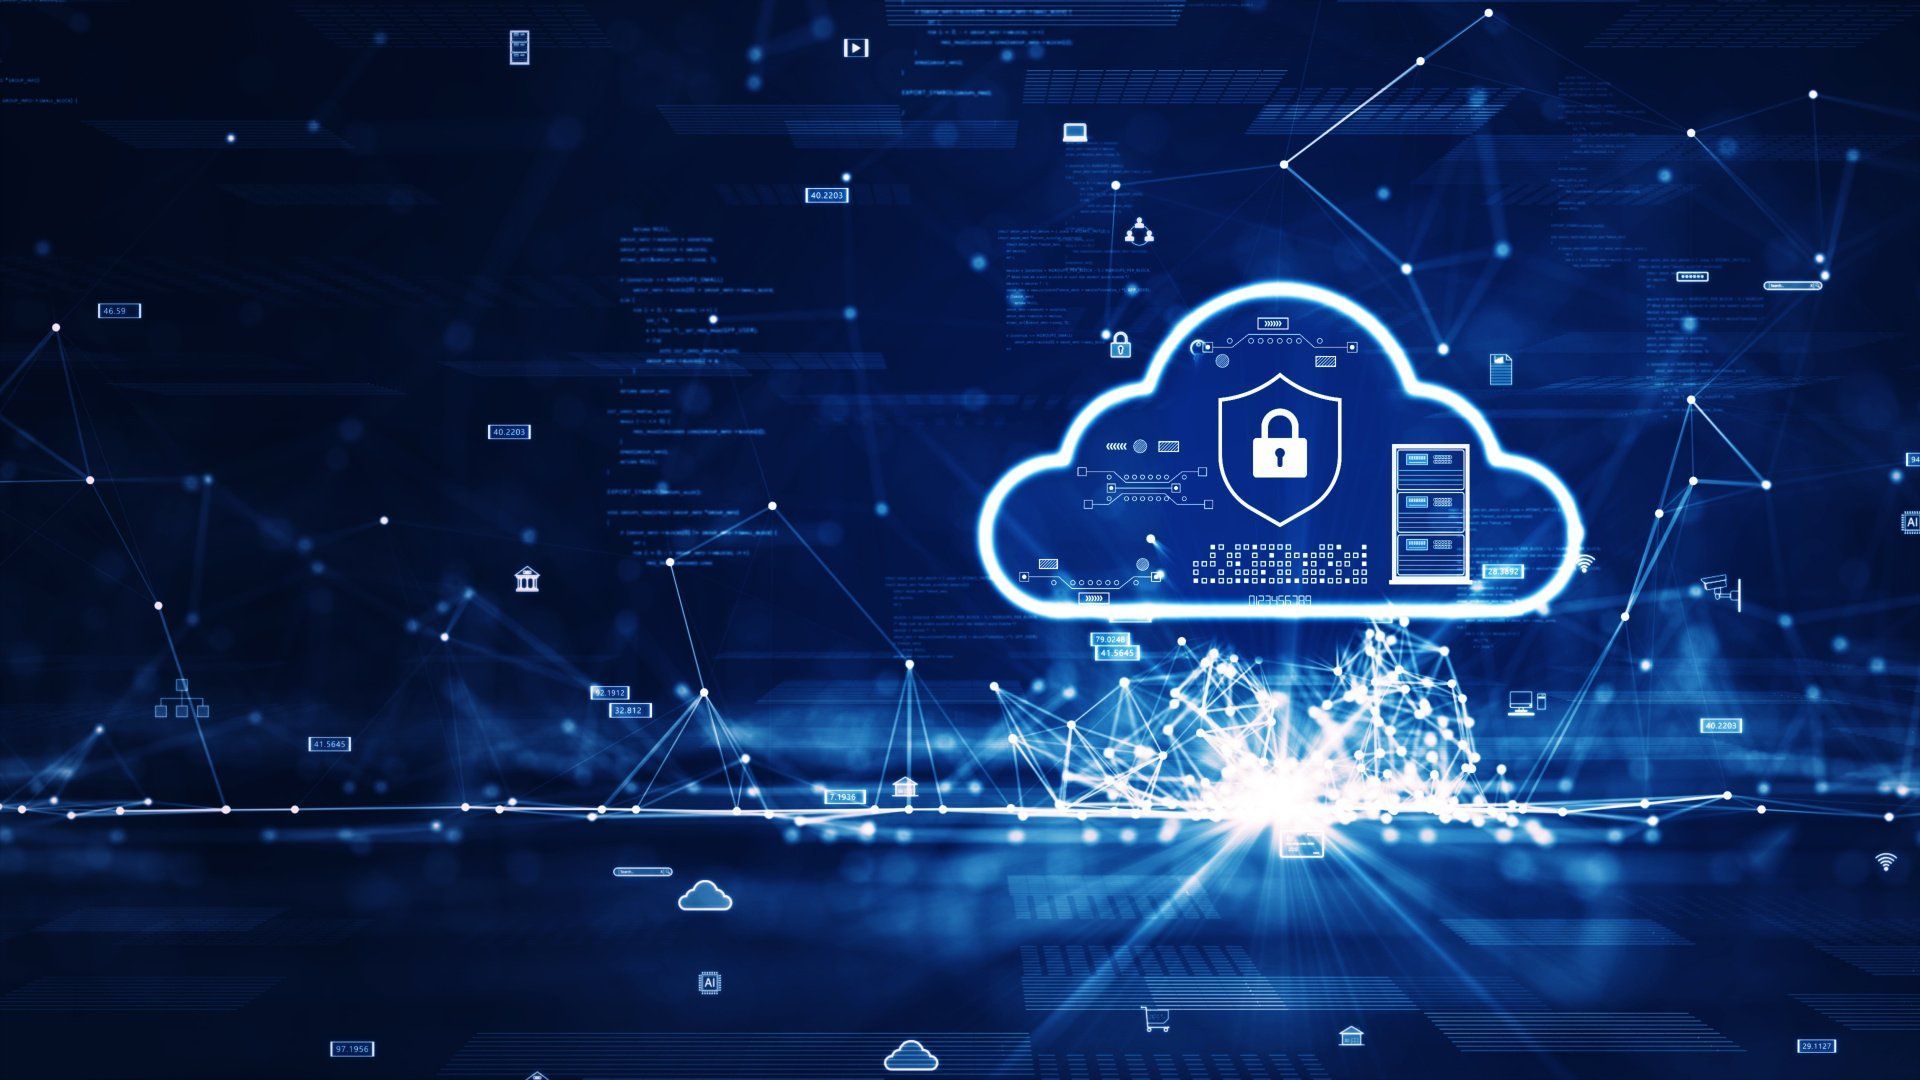 An image of a cloud with a secure lock represents the integrity of cloud services.